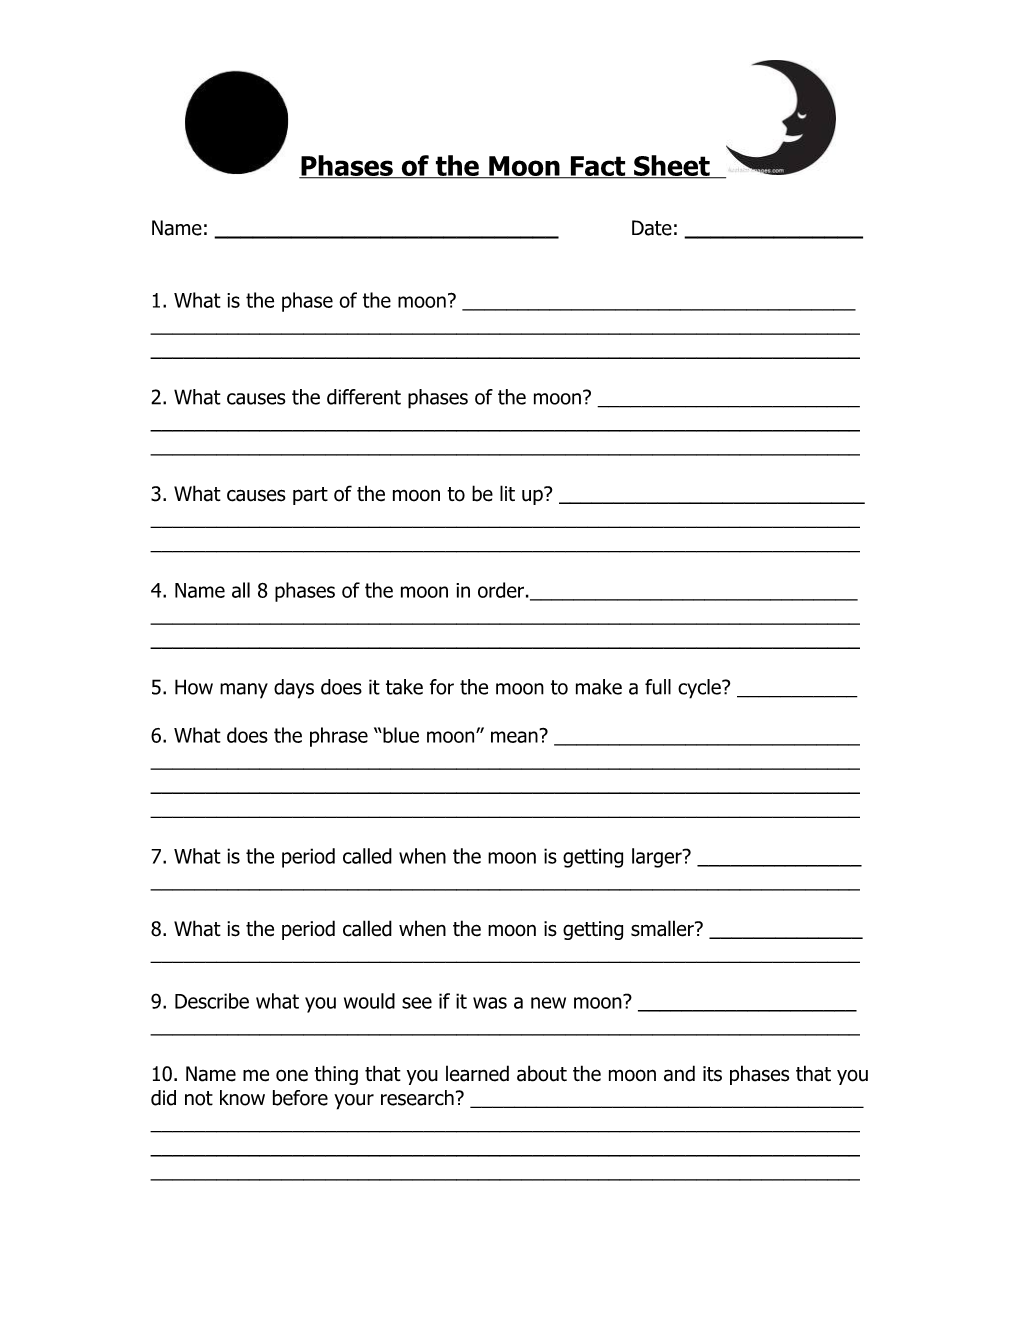 Phases of the Moon Fact Sheet